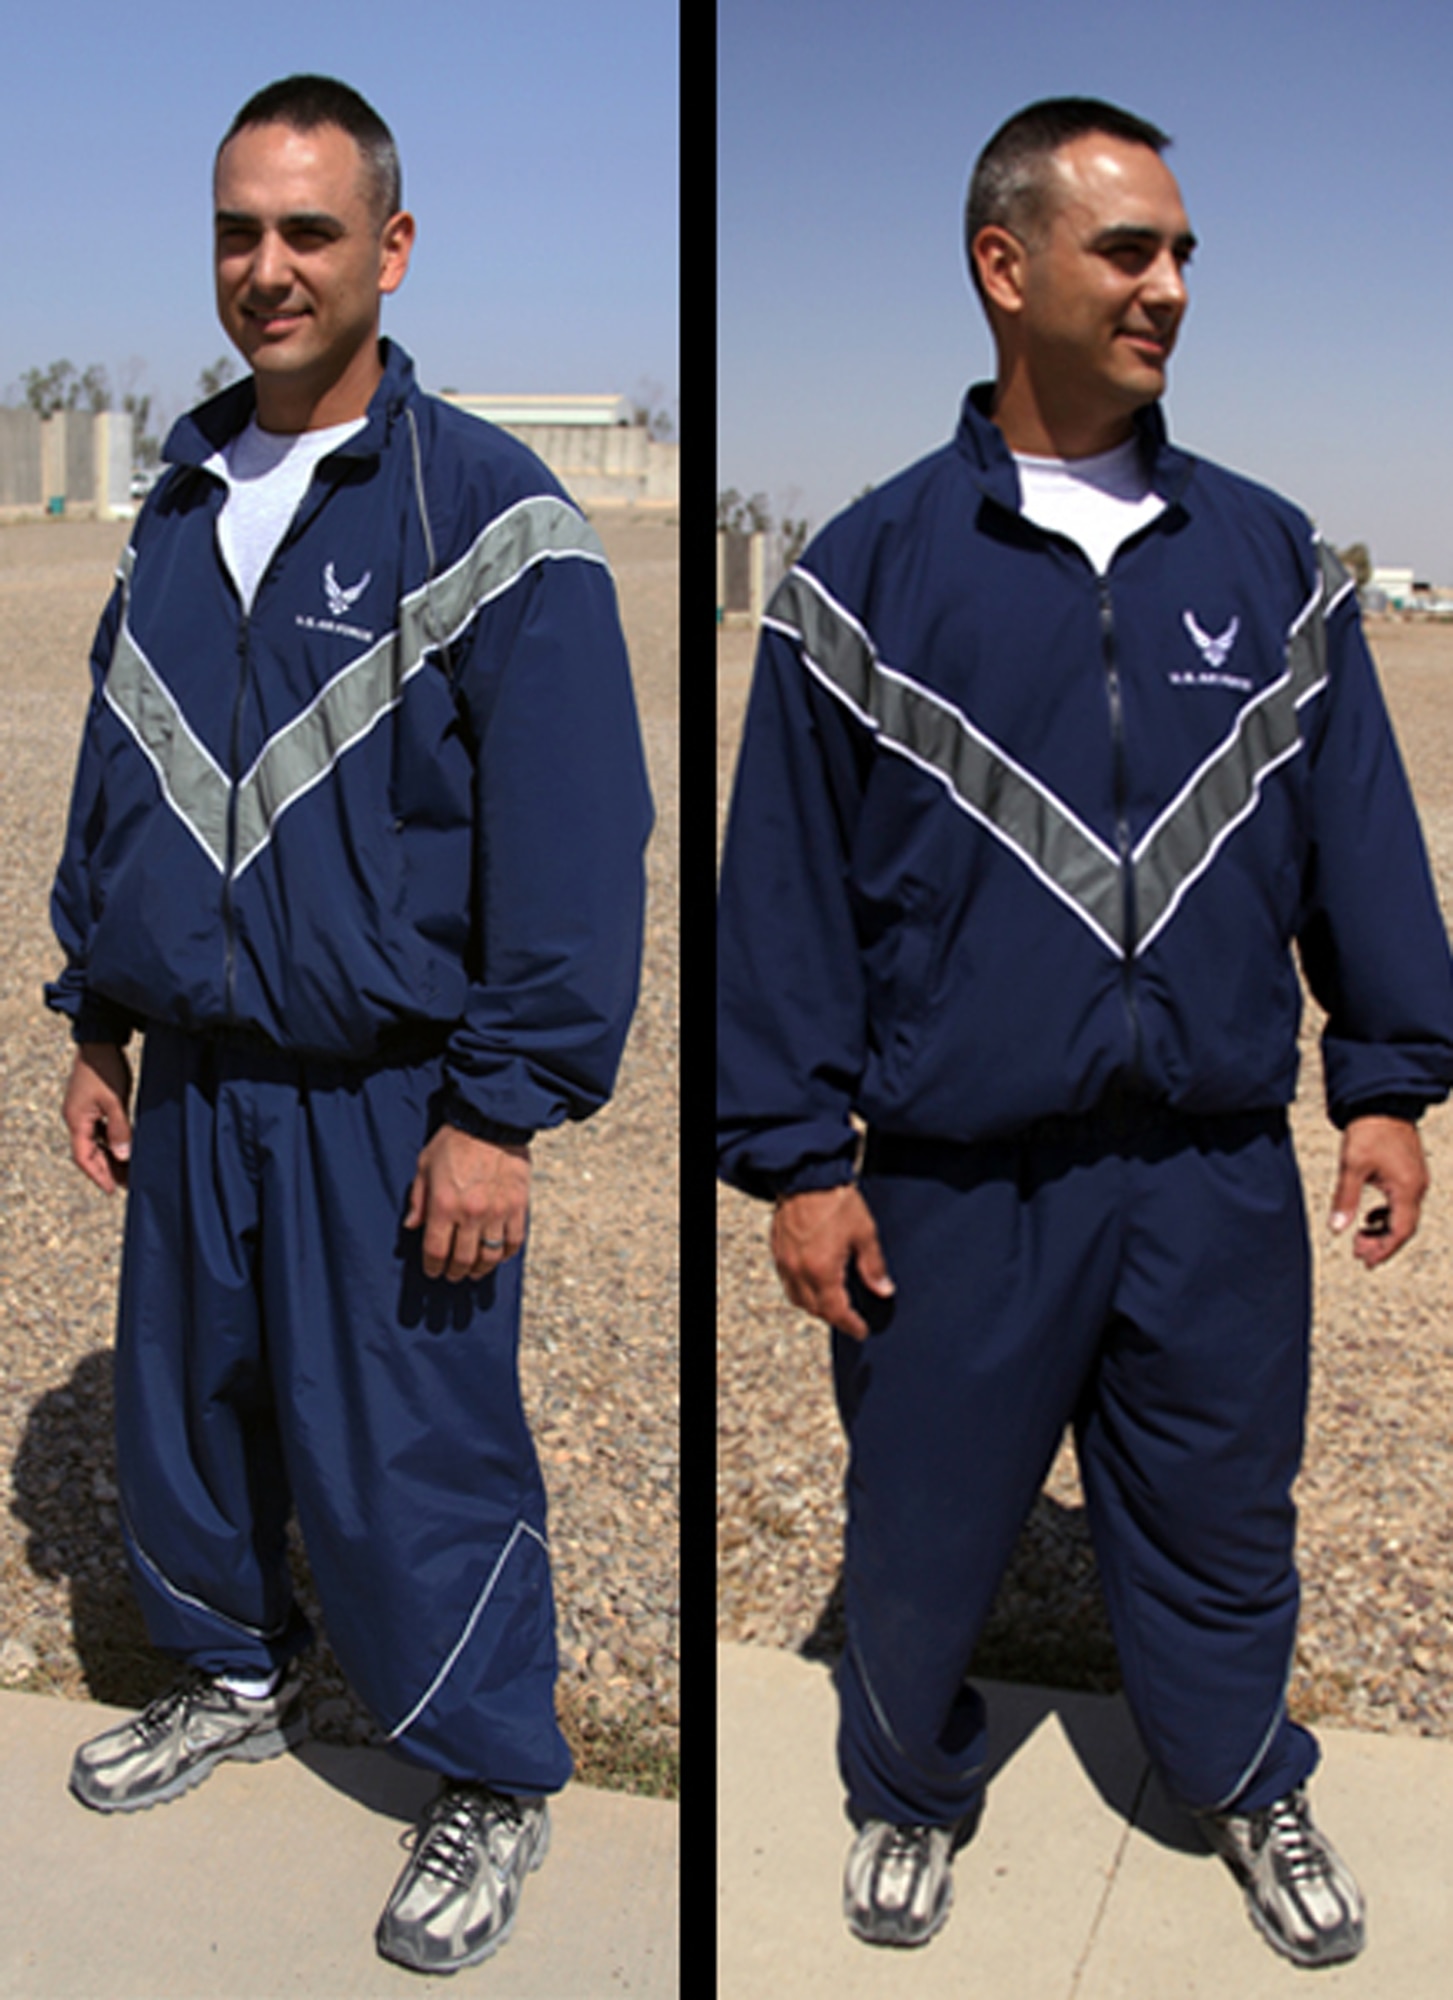 JOINT BASE BALAD, Iraq -- Senior Airman James Debiase, 332nd Expeditionary Civil Engineer Squadron emergency manager, models the current physical training uniform (left) and the modified PT uniform (right) here April 13. Airman Debiase was selected to field-test the modified PT uniform while deployed here from Dyess Air Force Base, Texas, and to provide feedback to leadership at the end of April. Sergeant Debiase's hometown is Glastonbury, Conn. (U.S. Air Force photo illustration/Tech. Sgt. Lionel Castellano)   